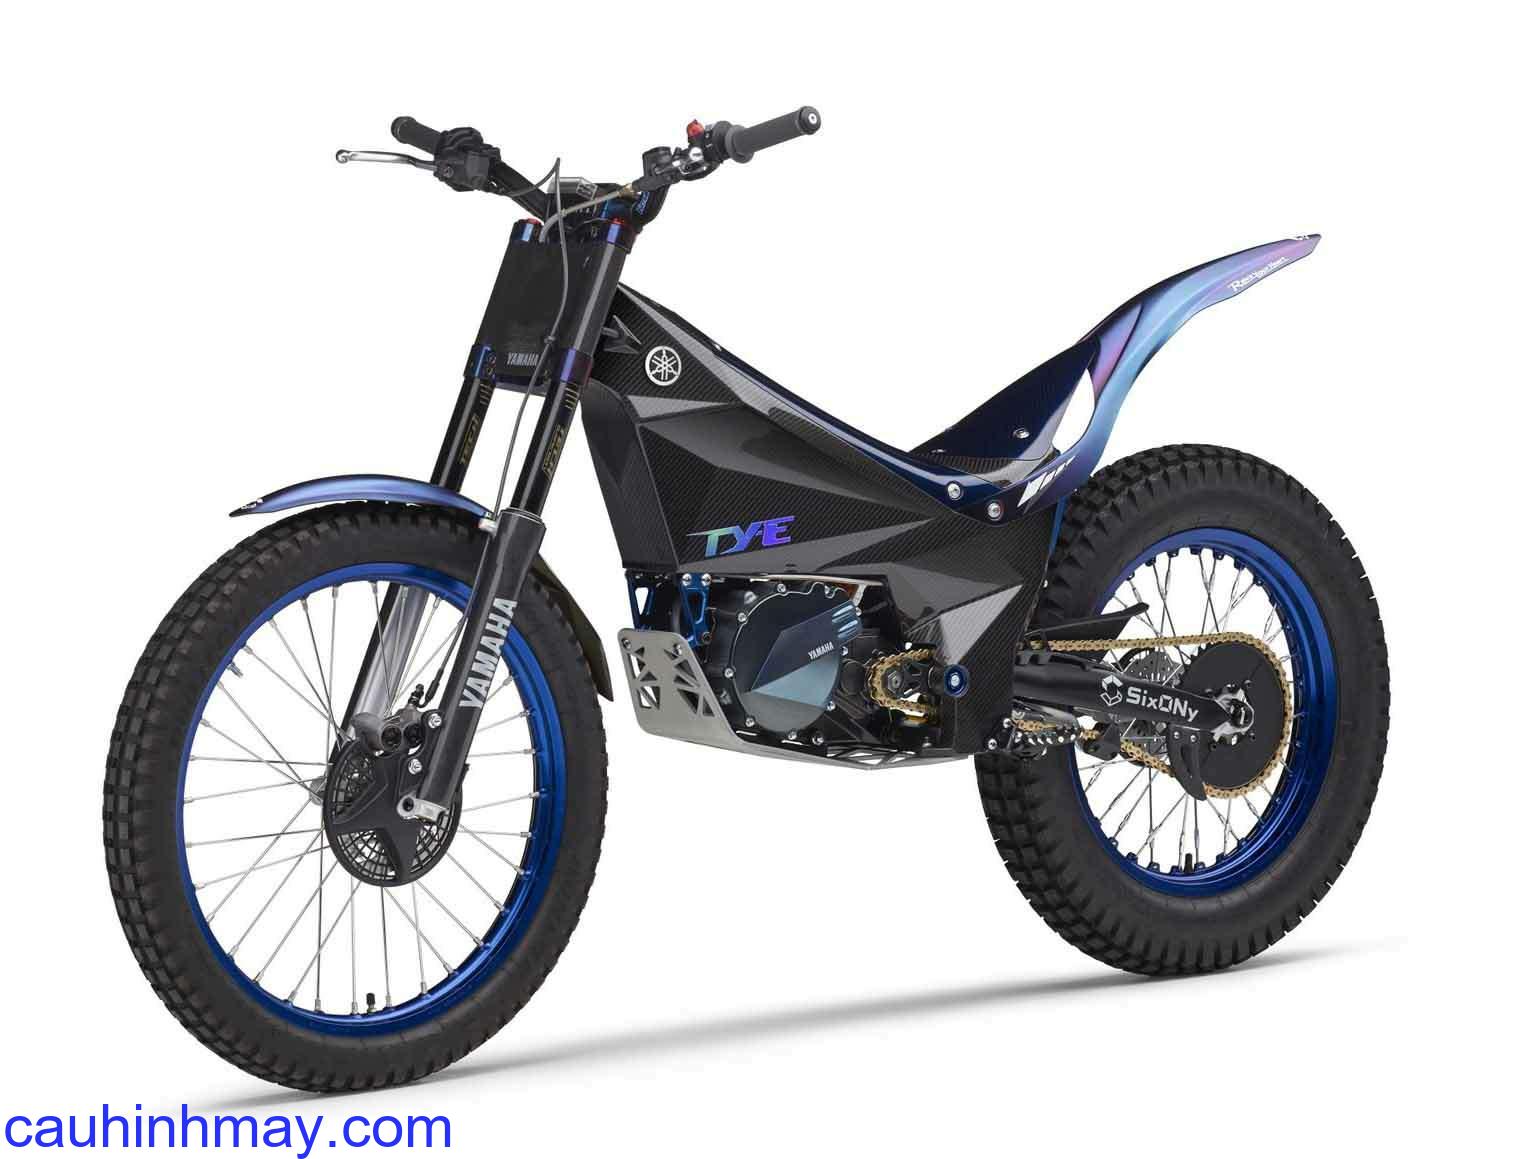 YAMAHA TY-E ELECTRIC TRIALS